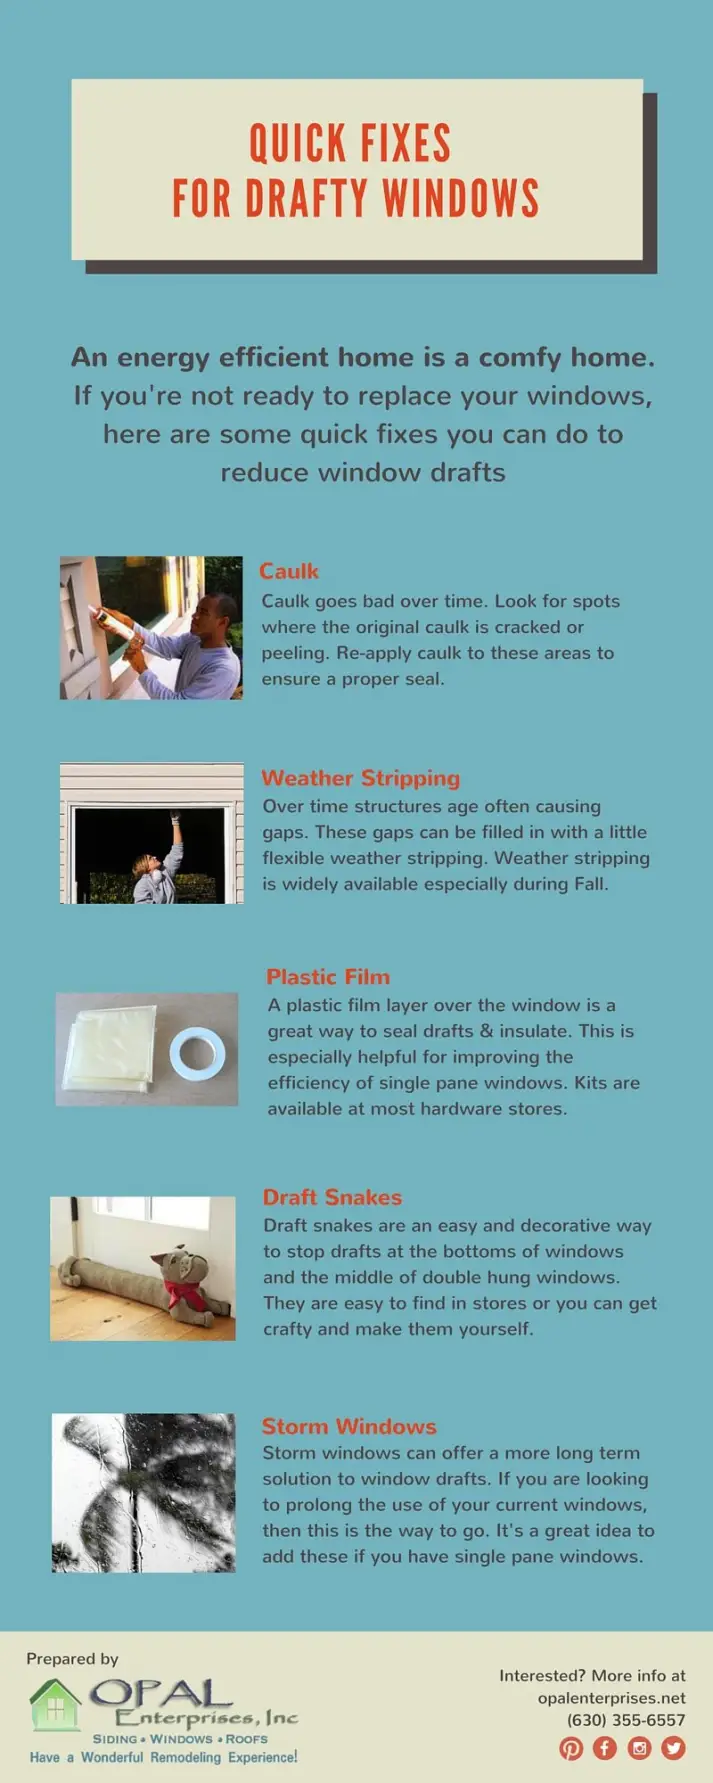 Quick Fixes for drafty windows infographic by Opal Enterprises of Naperville